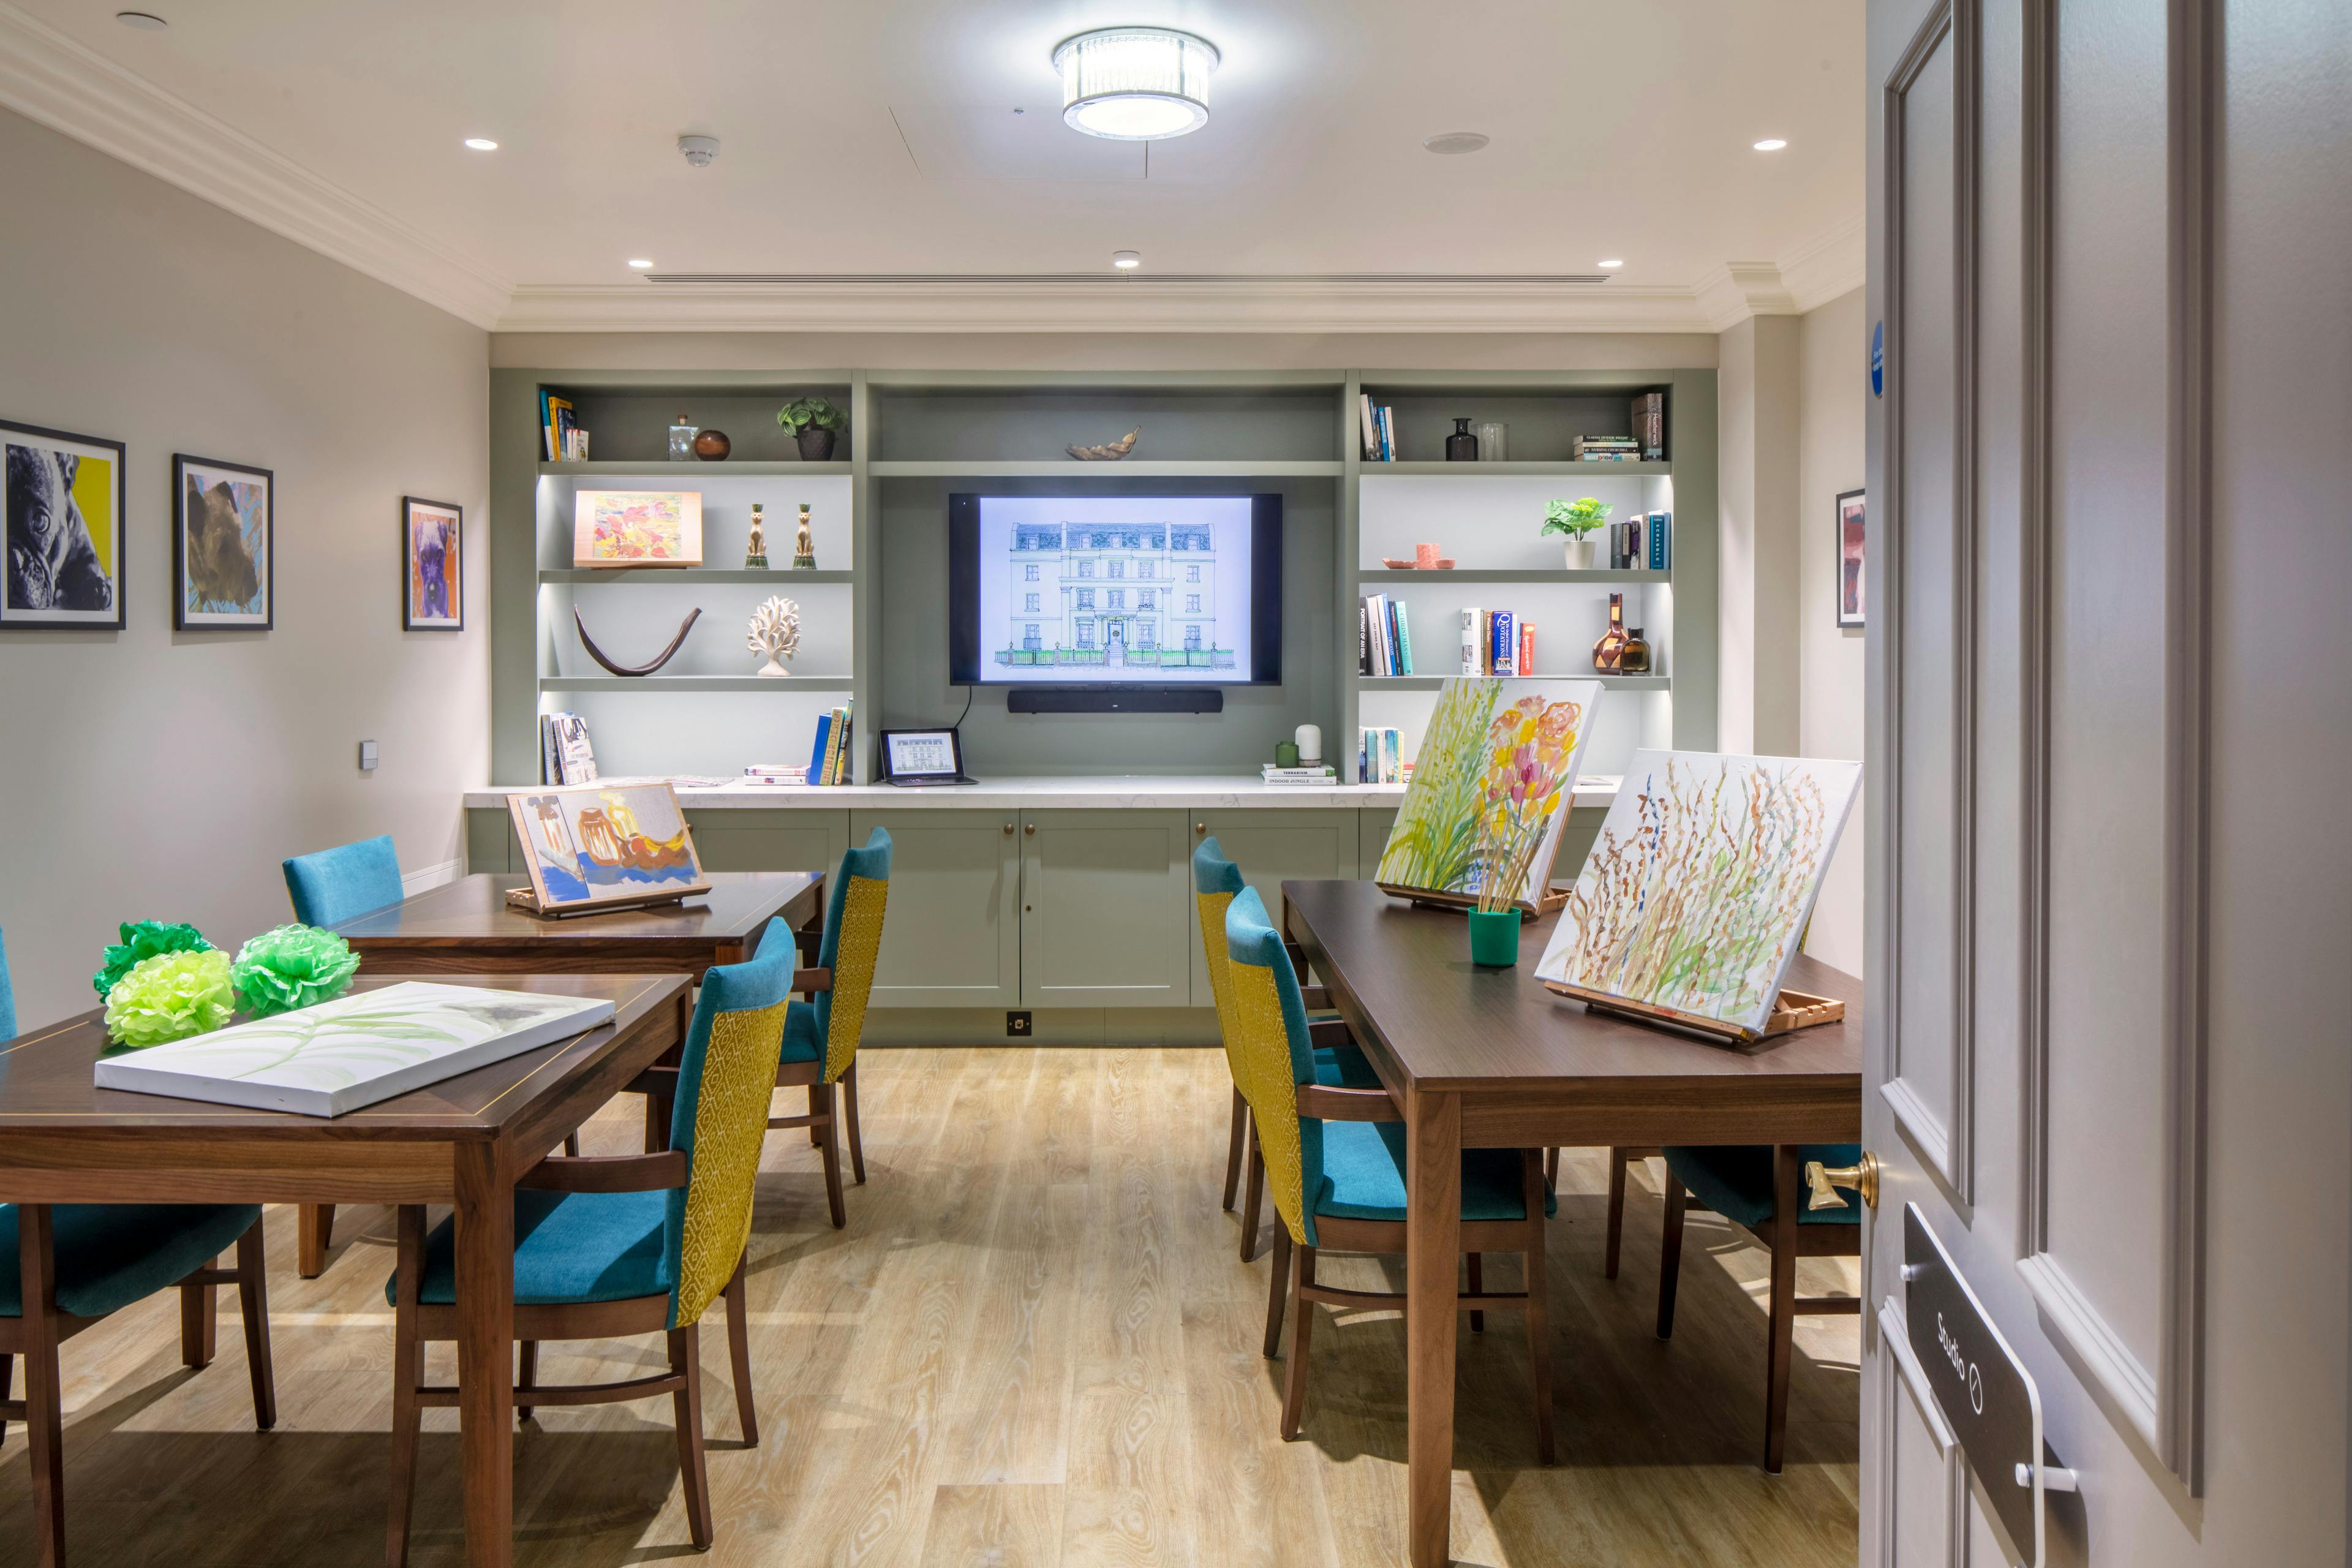 Activity Room at Abbey Road Care Home in London, England